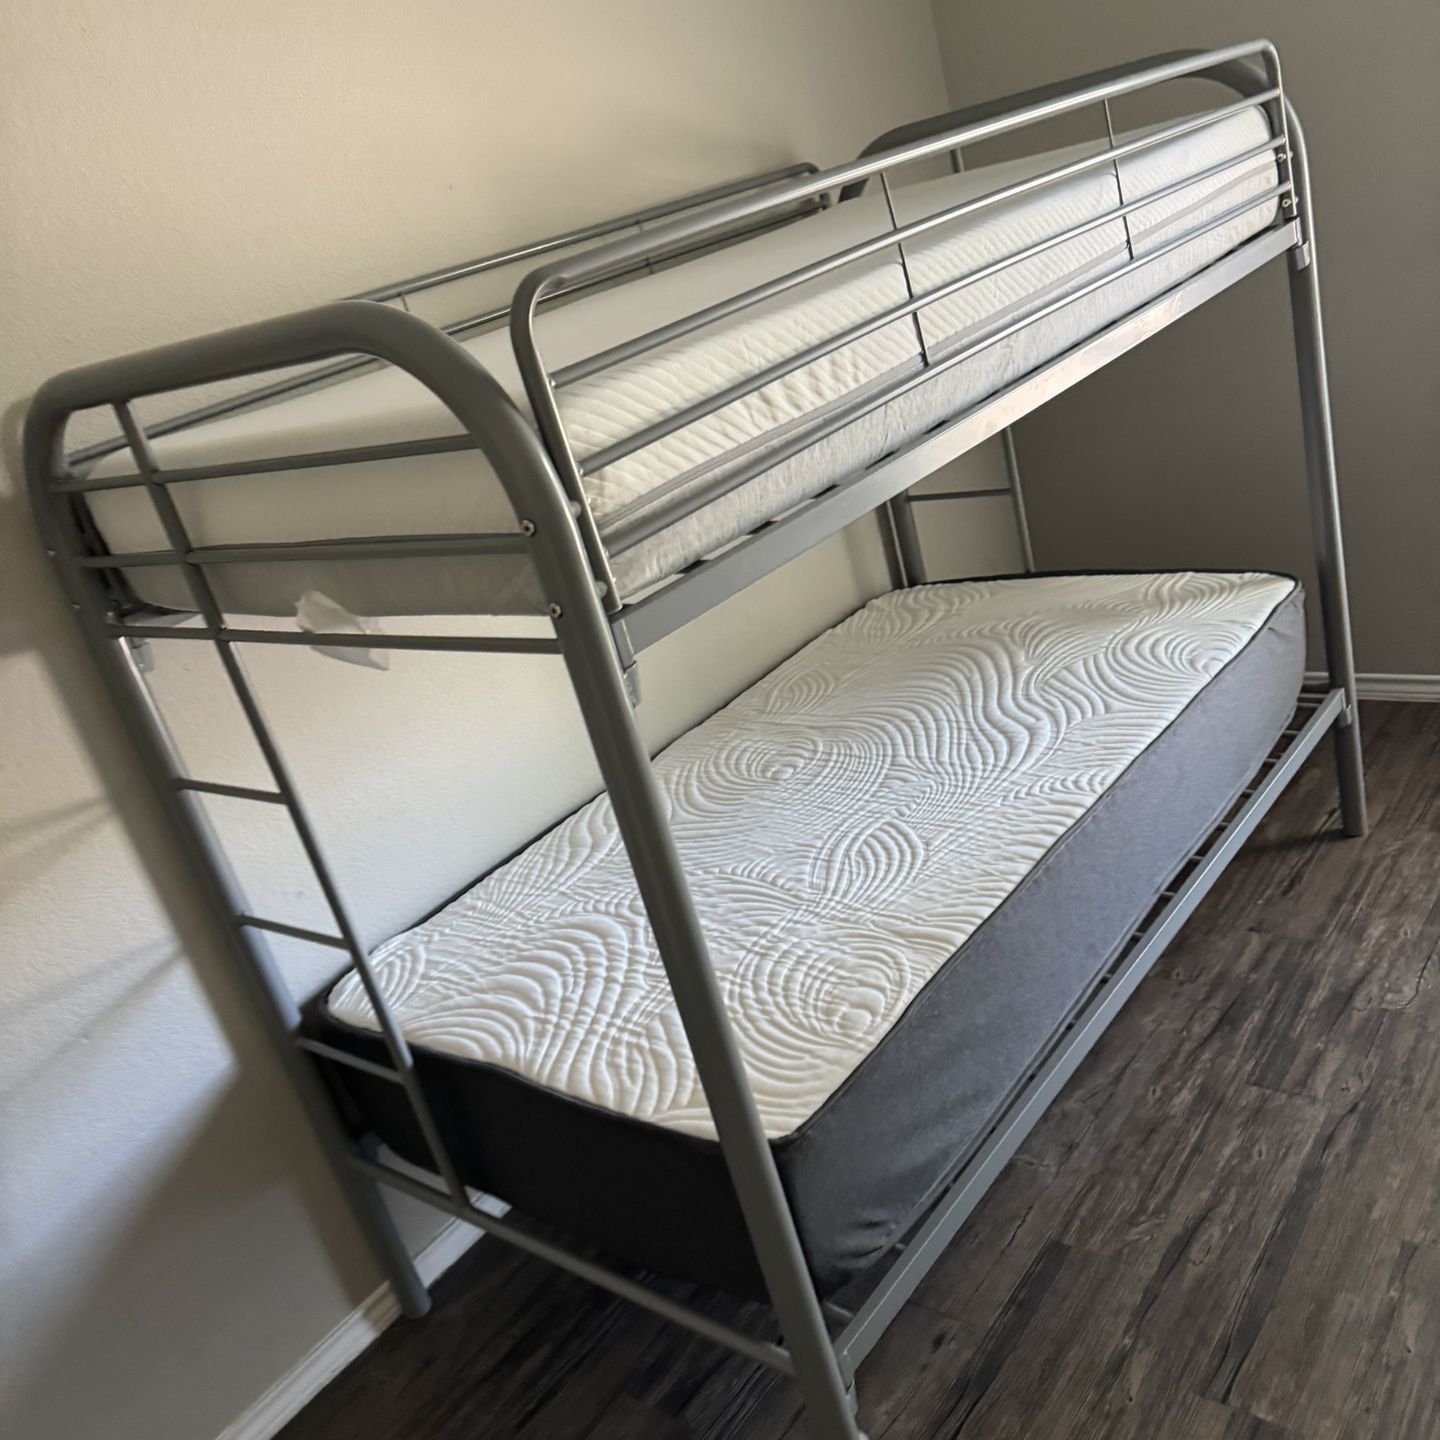 New Bunk Bed For $400